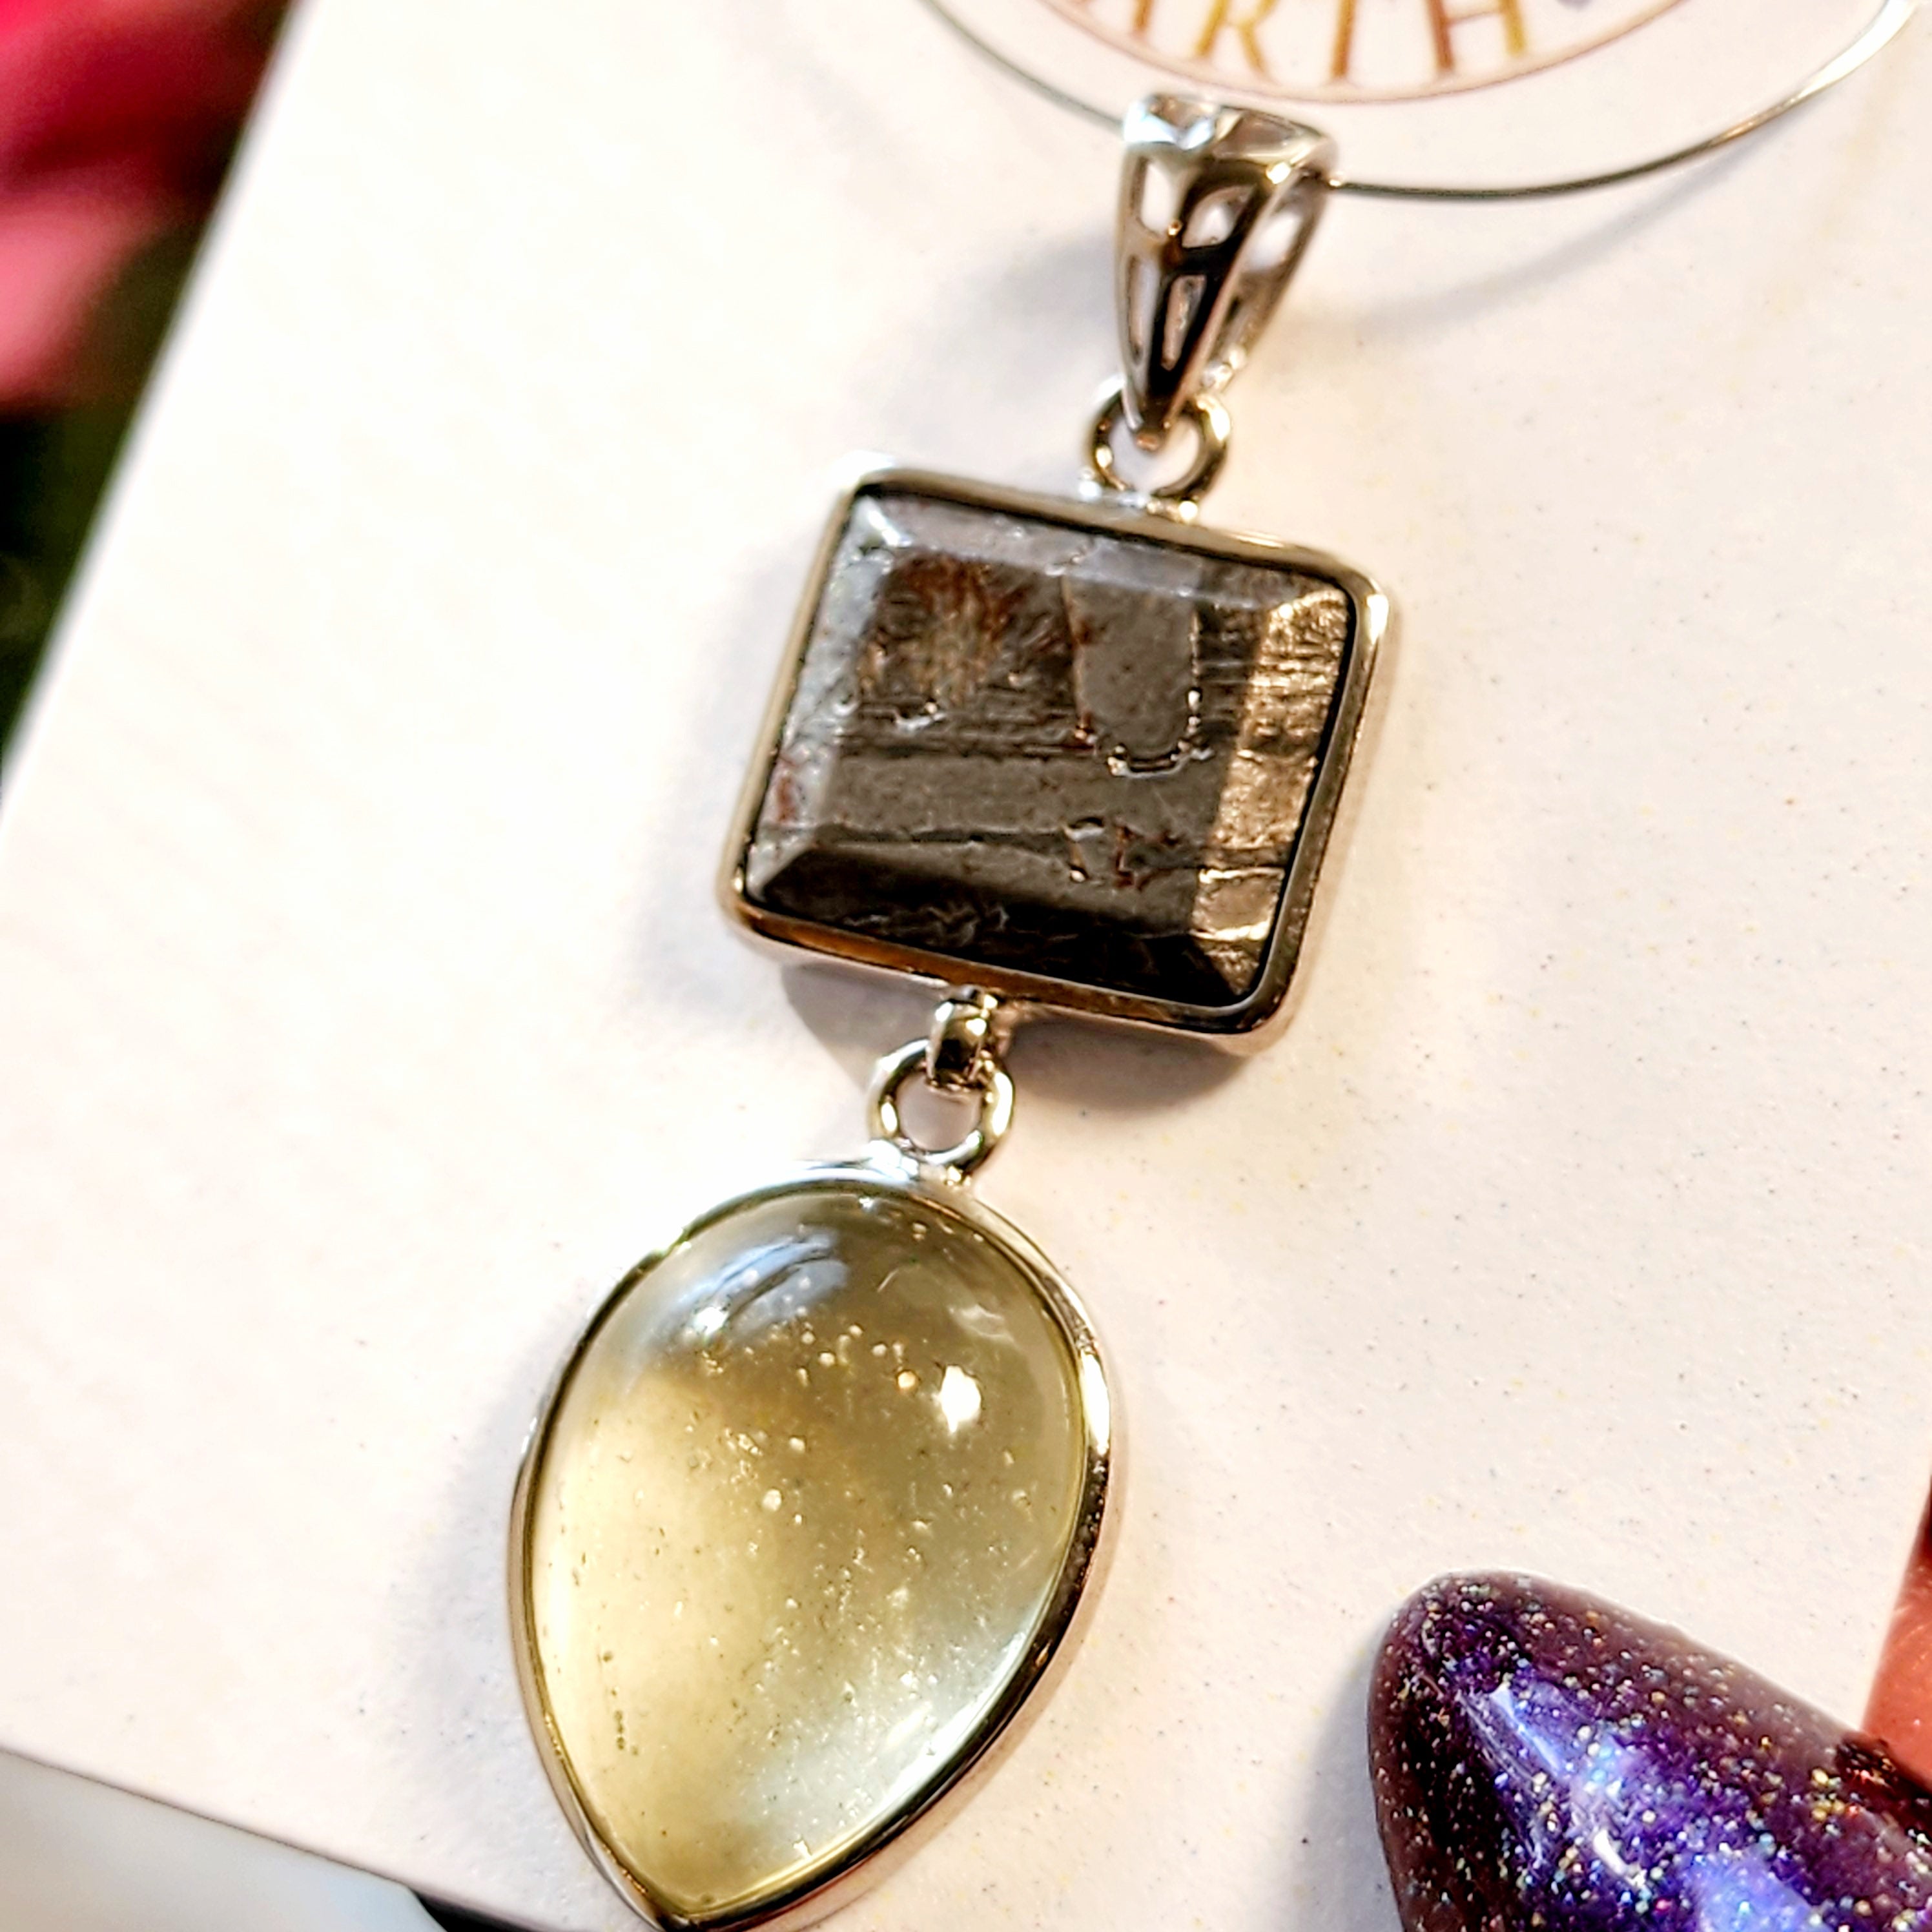 Libyan Desert Glass x Meteorite Pendant .925 Silver for Confidence, Manifesting and Personal Power